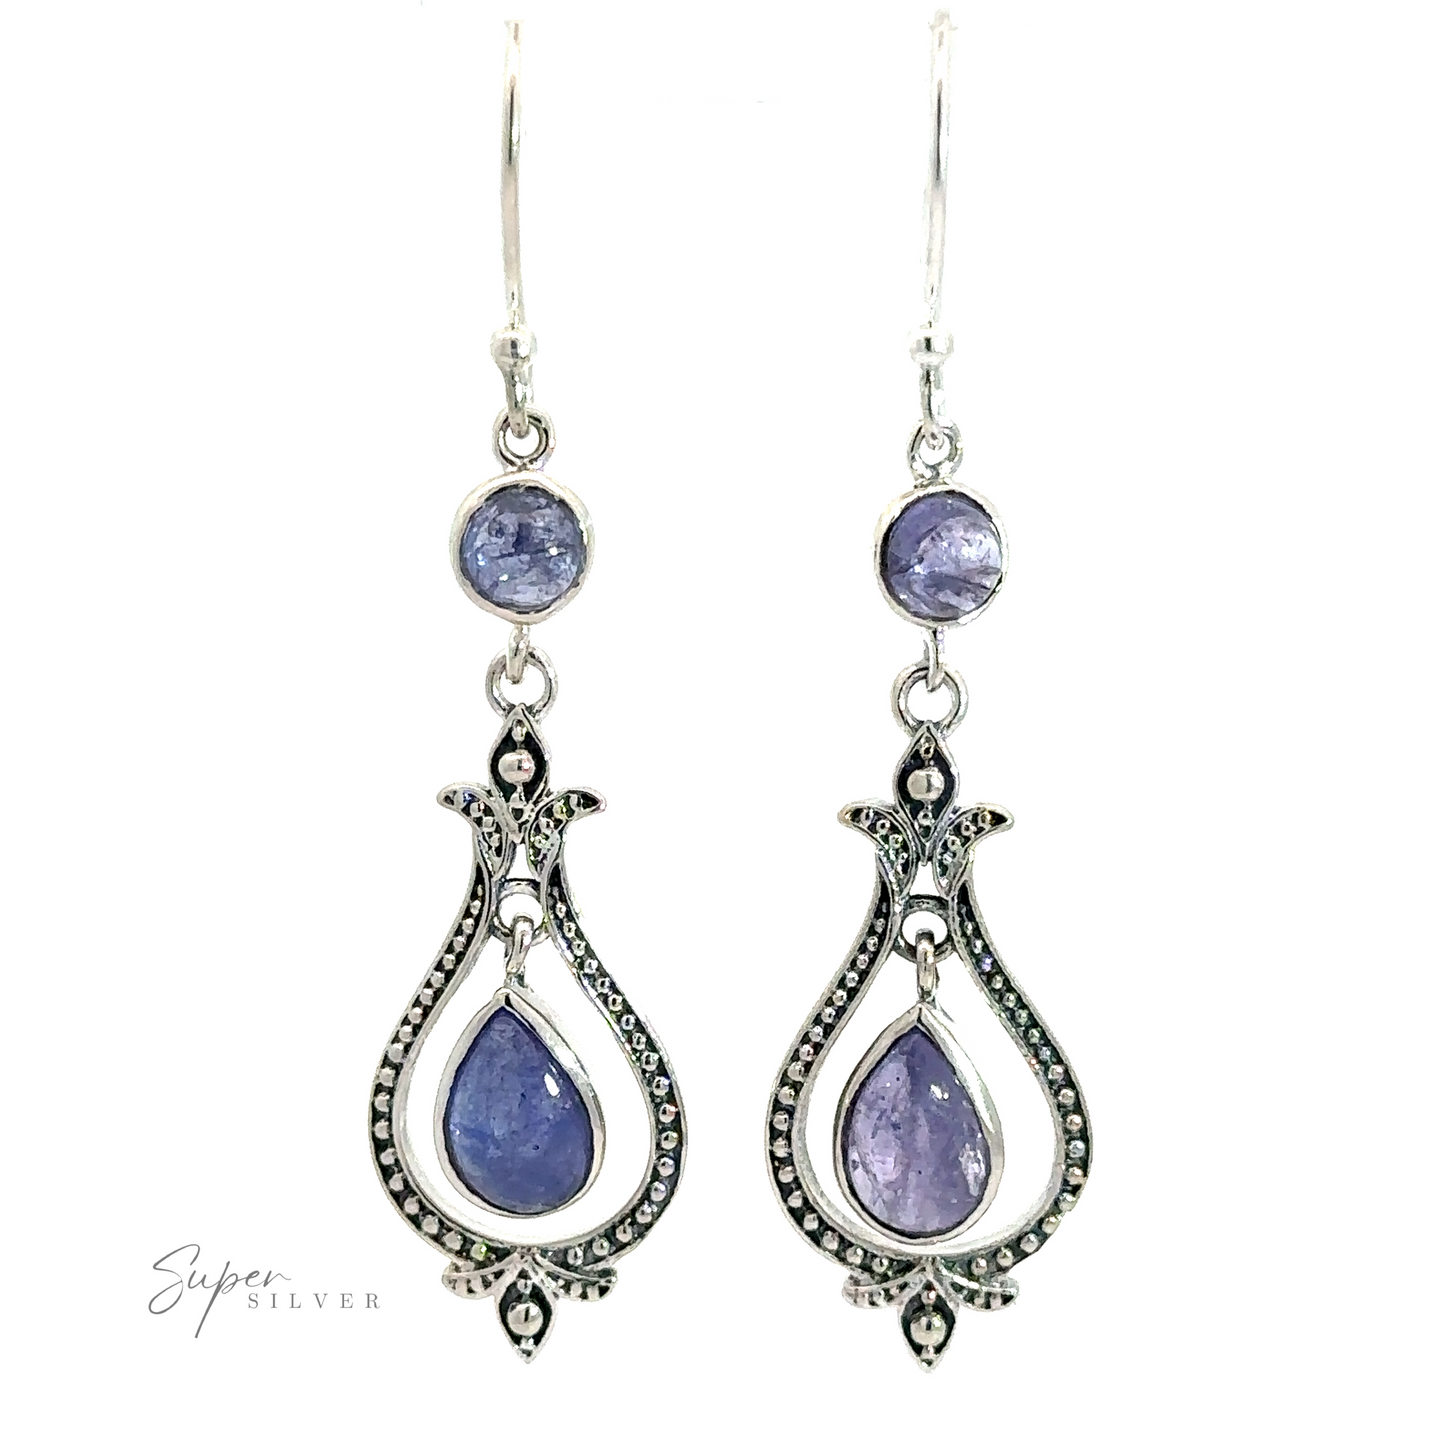 
                  
                    A pair of Vintage-Styled Teardrop Earrings with Gemstones featuring circular and teardrop-shaped blue gemstones, adorned with intricate detailing and crafted in .925 sterling silver.
                  
                